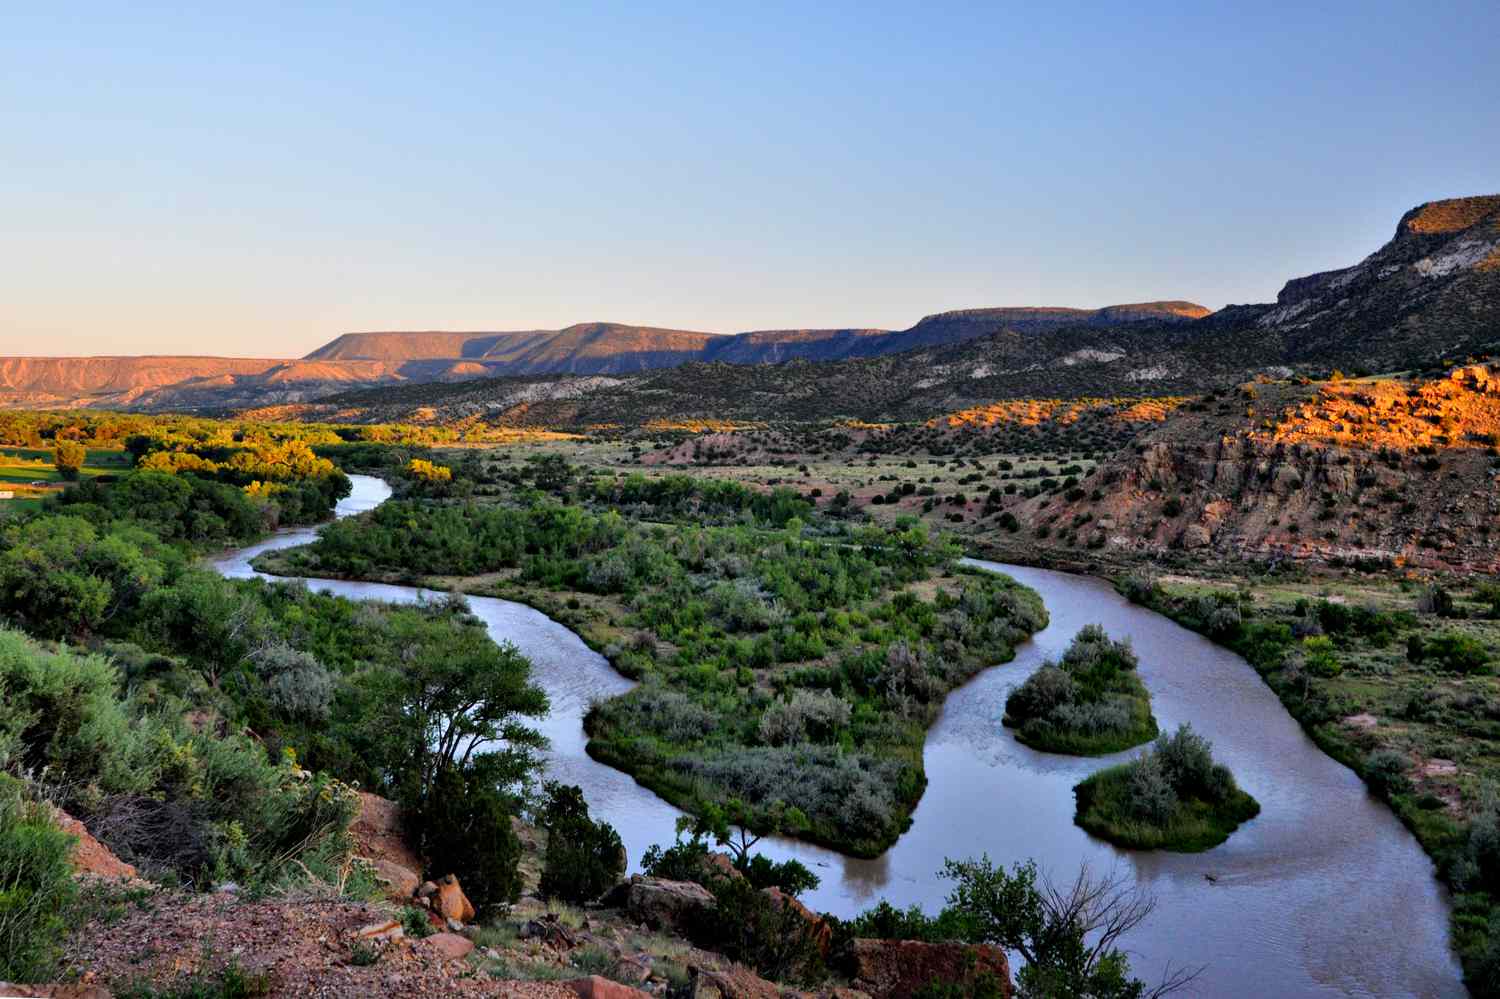 15-facts-about-local-wildlife-and-natural-reserves-in-santa-fe-new-mexico